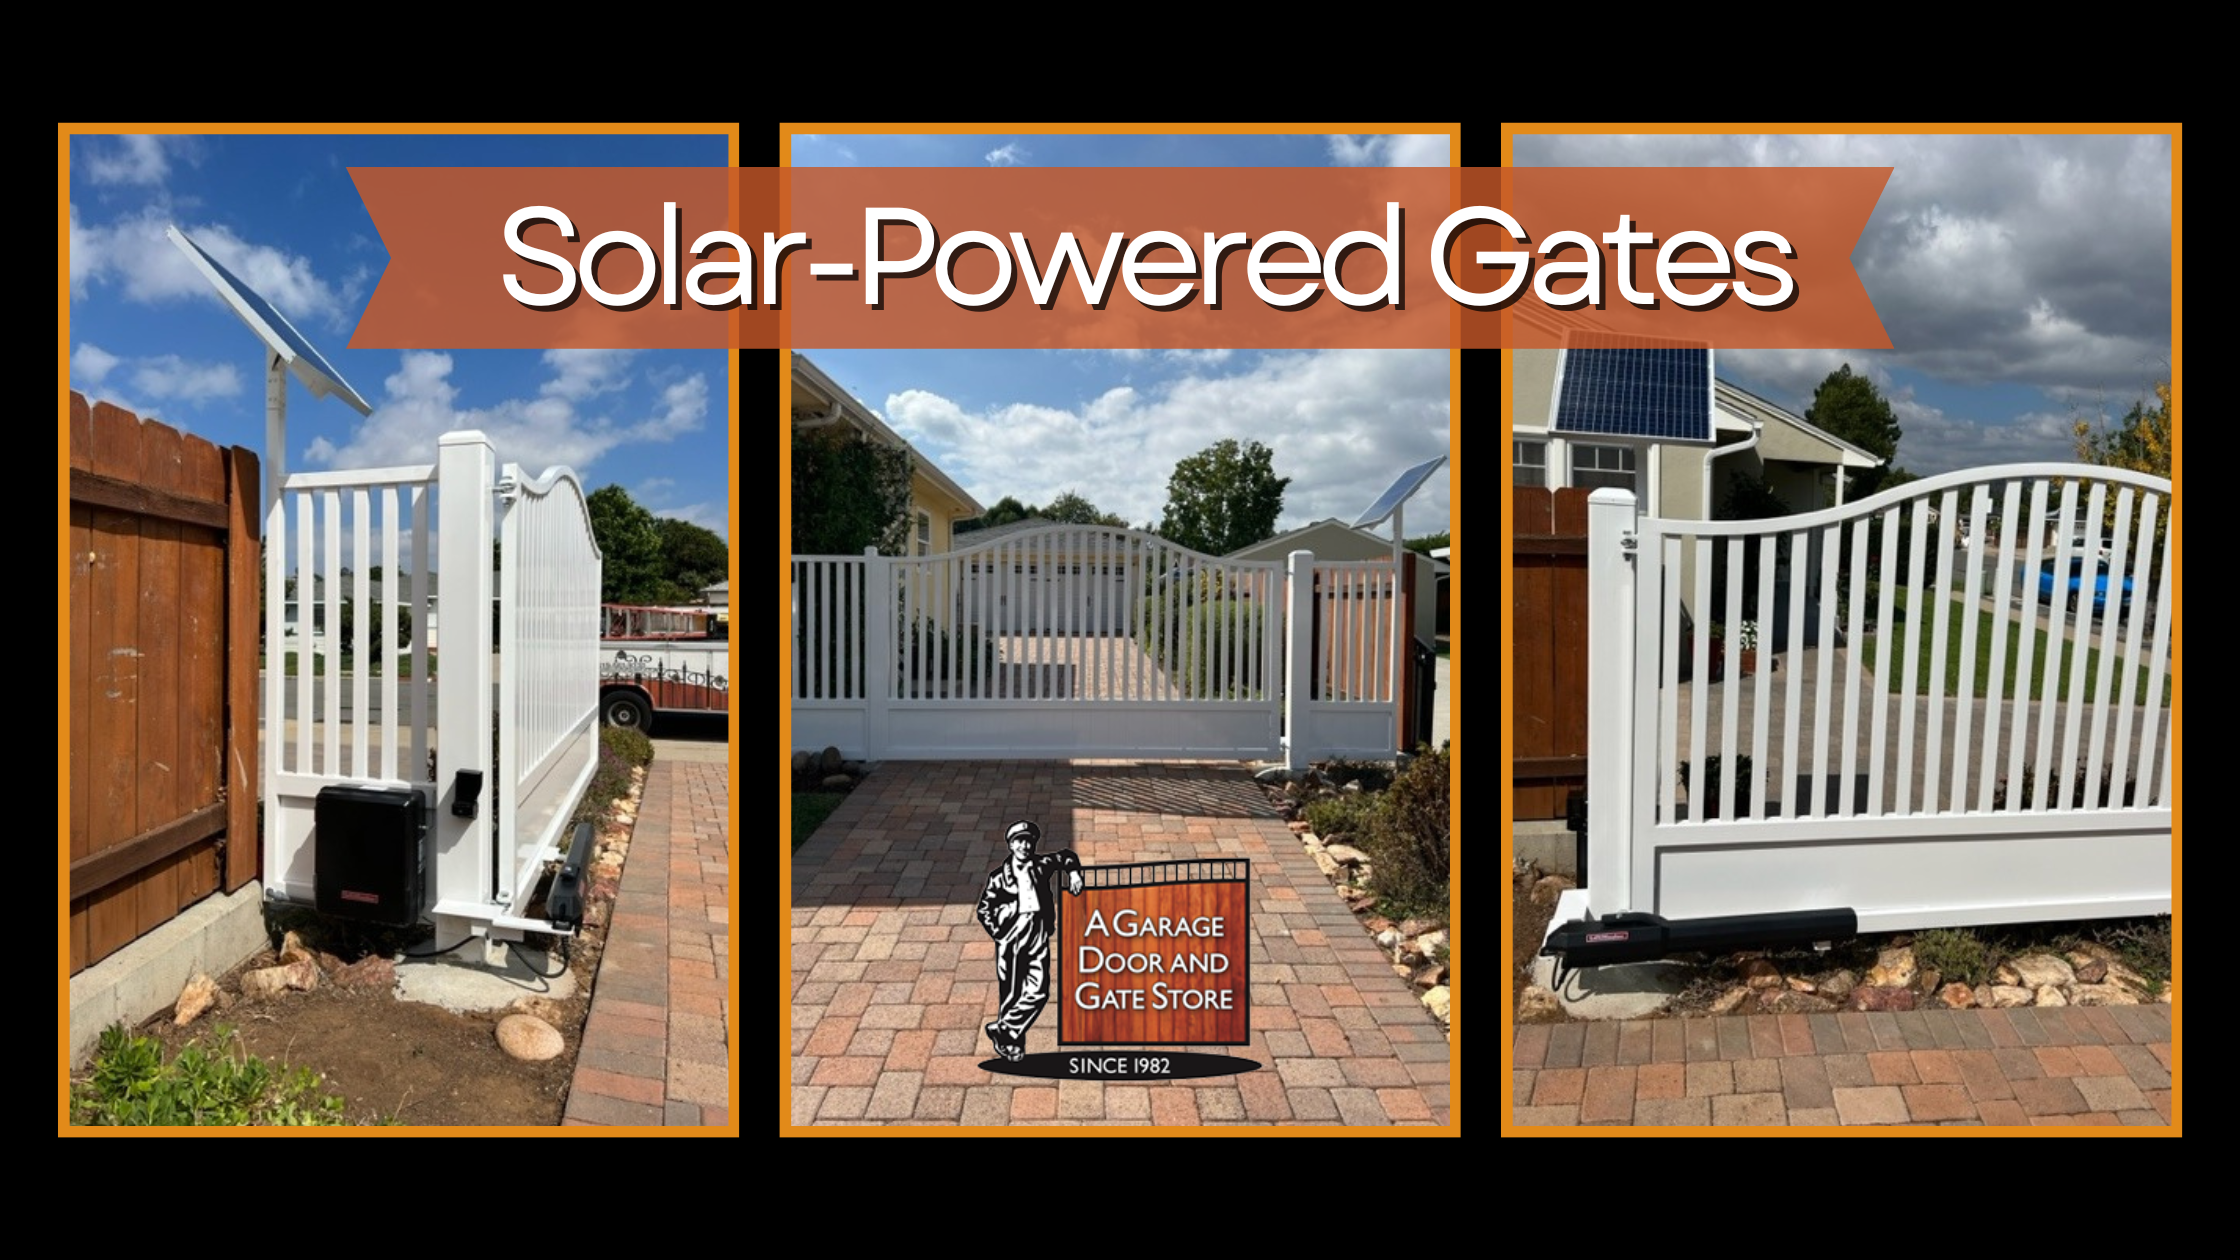 Solar-Powered Gates, featuring three different white gates in various settings around San Diego, California. The central gate is shown closed across a brick driveway, the left image displays the gate's solar panel and control box, and the right image shows a closed gate with a view of a residential yard in the background. The graphic includes an orange and brown design theme with the logo of "A Garage Door and Gate Store" since 1982 at the bottom center.